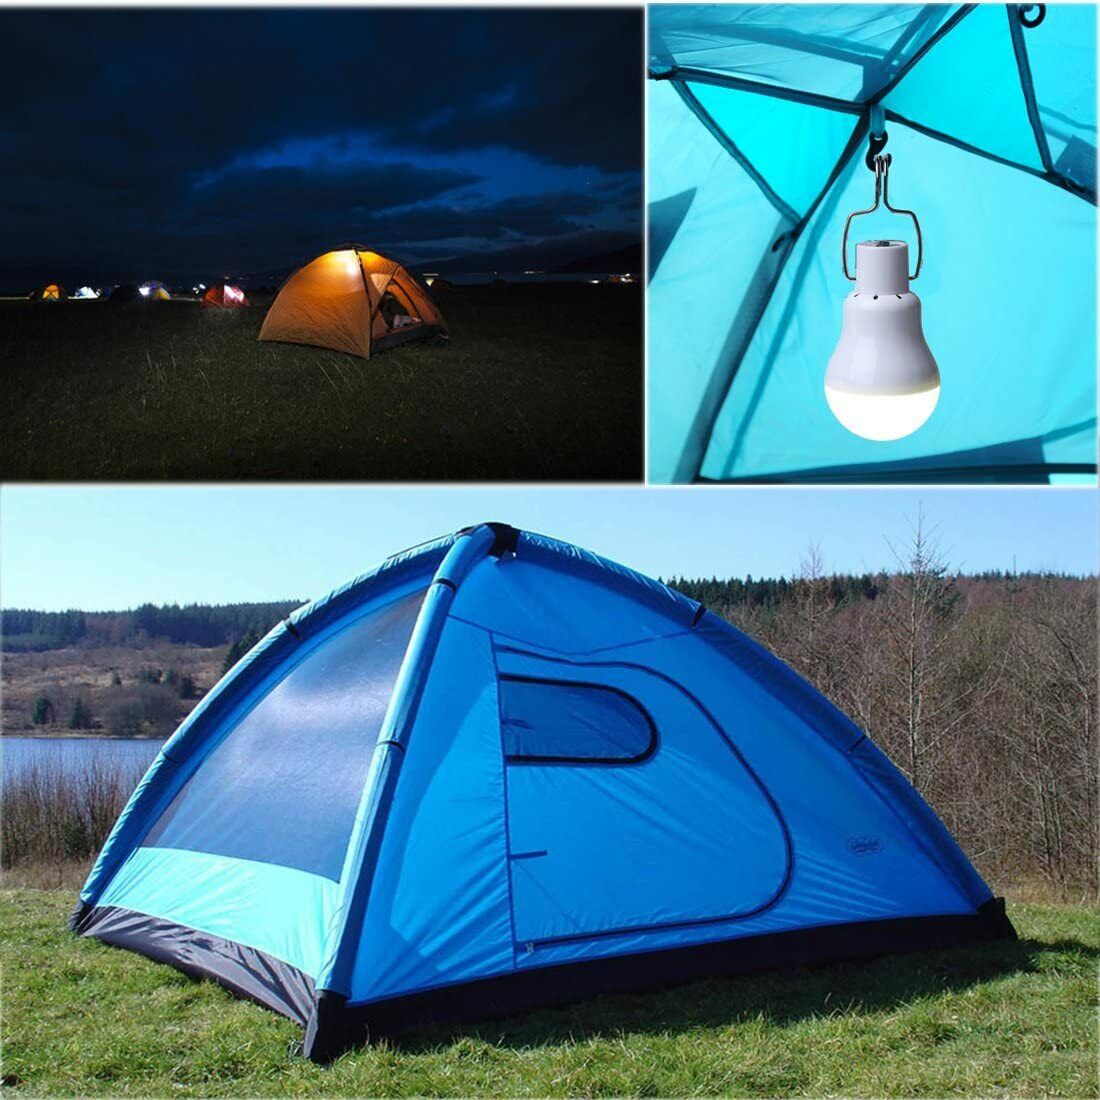 Solar Panel Power LED Light Bulb Solar or AC charger Camp Tent Fishing Lamp